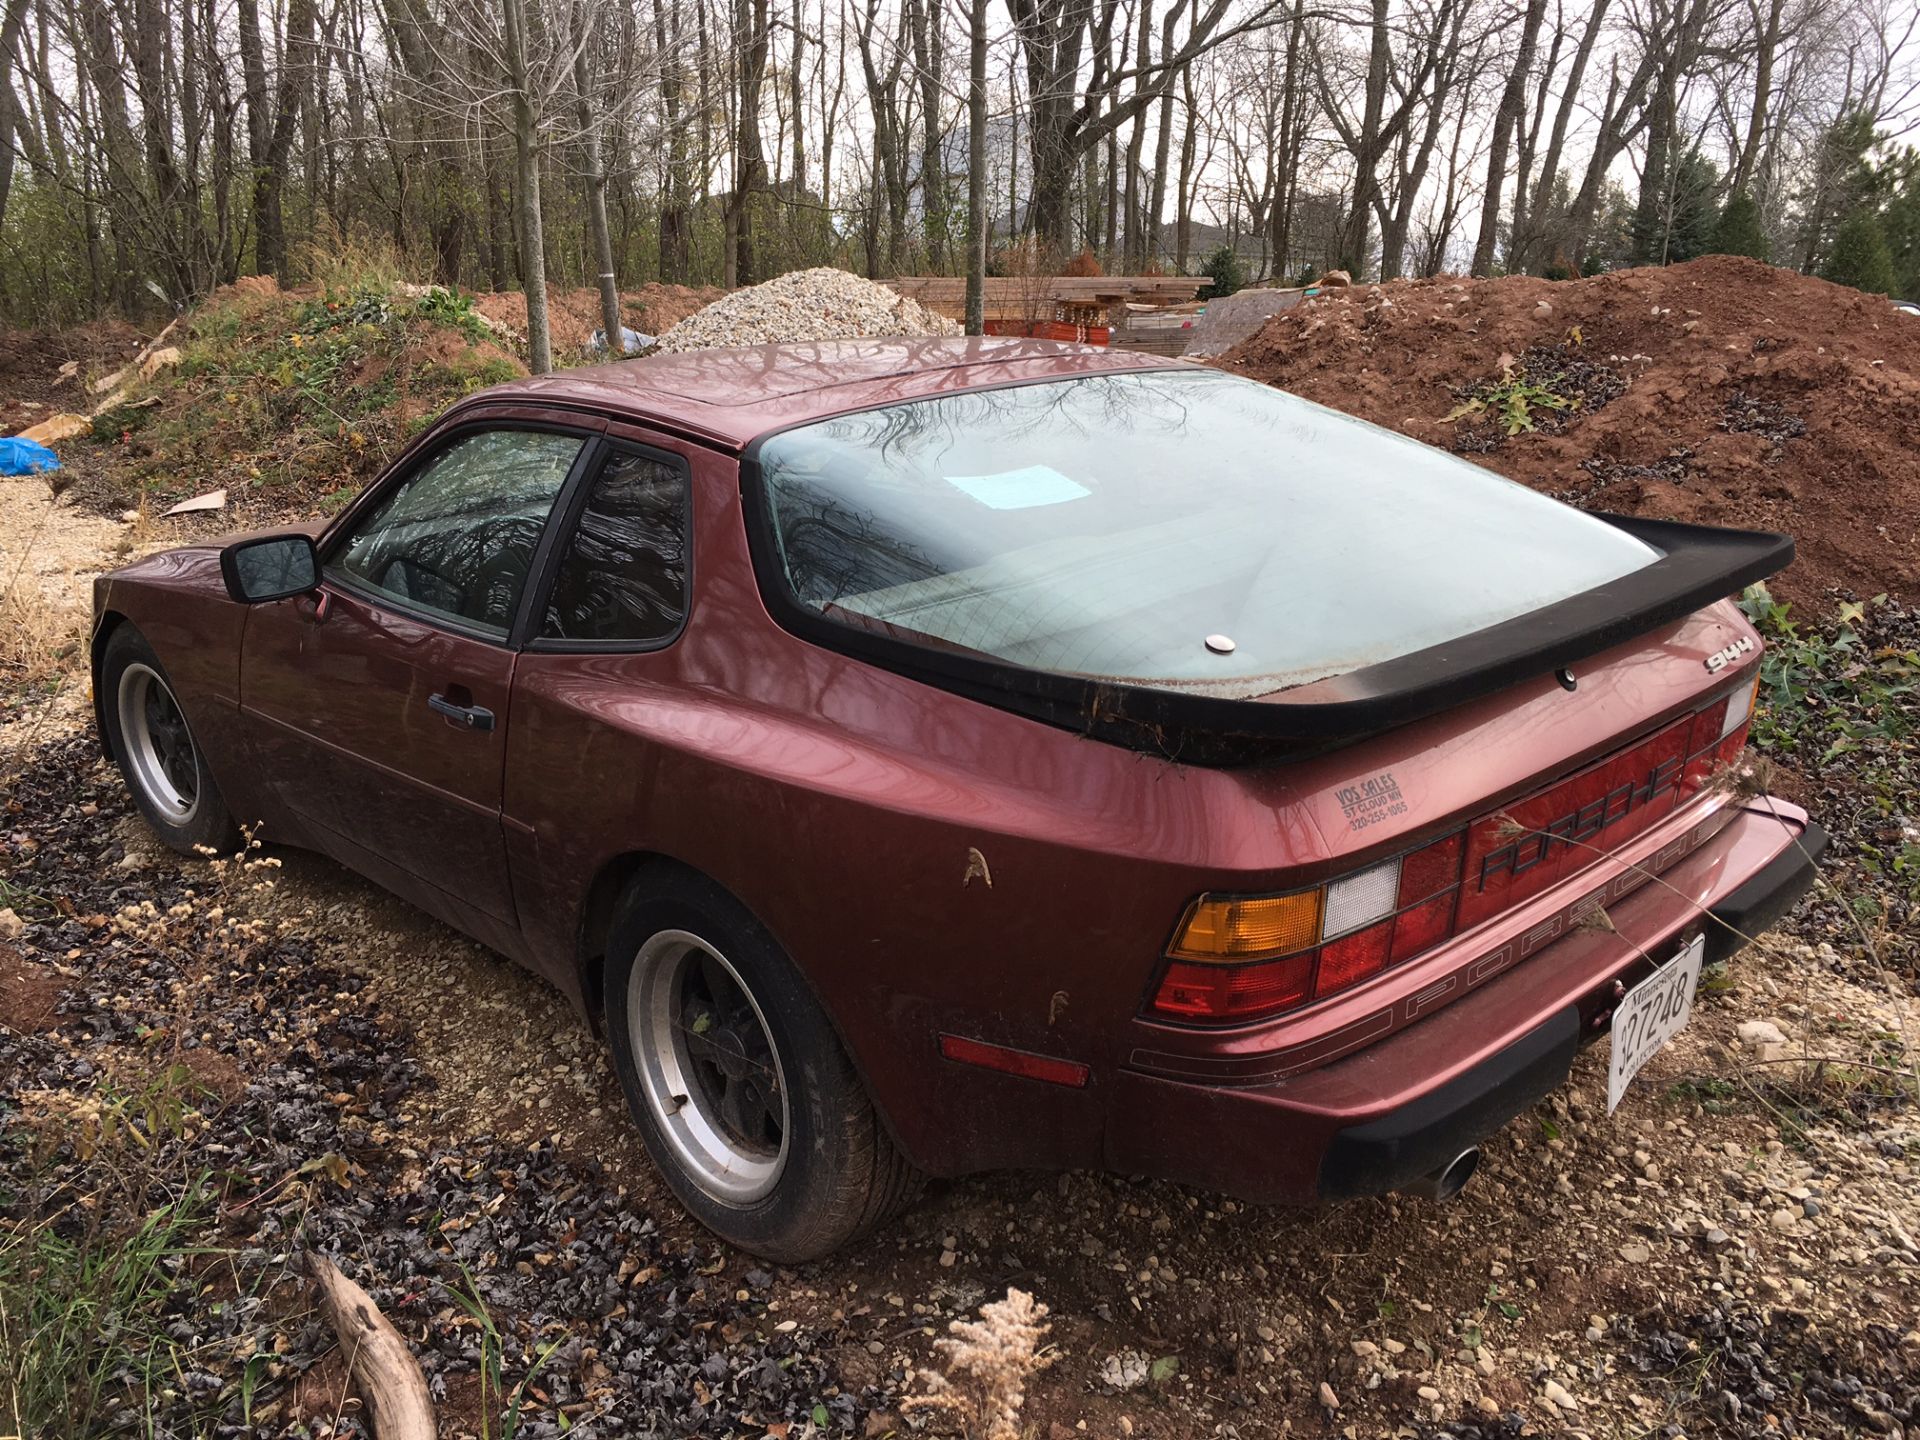 (1984) PORSCHE 944 VIN#: WP0AA0948EN461206; 5 SPEED MANUAL TRANSMISSION, RUNNING CONDITION - Image 5 of 12